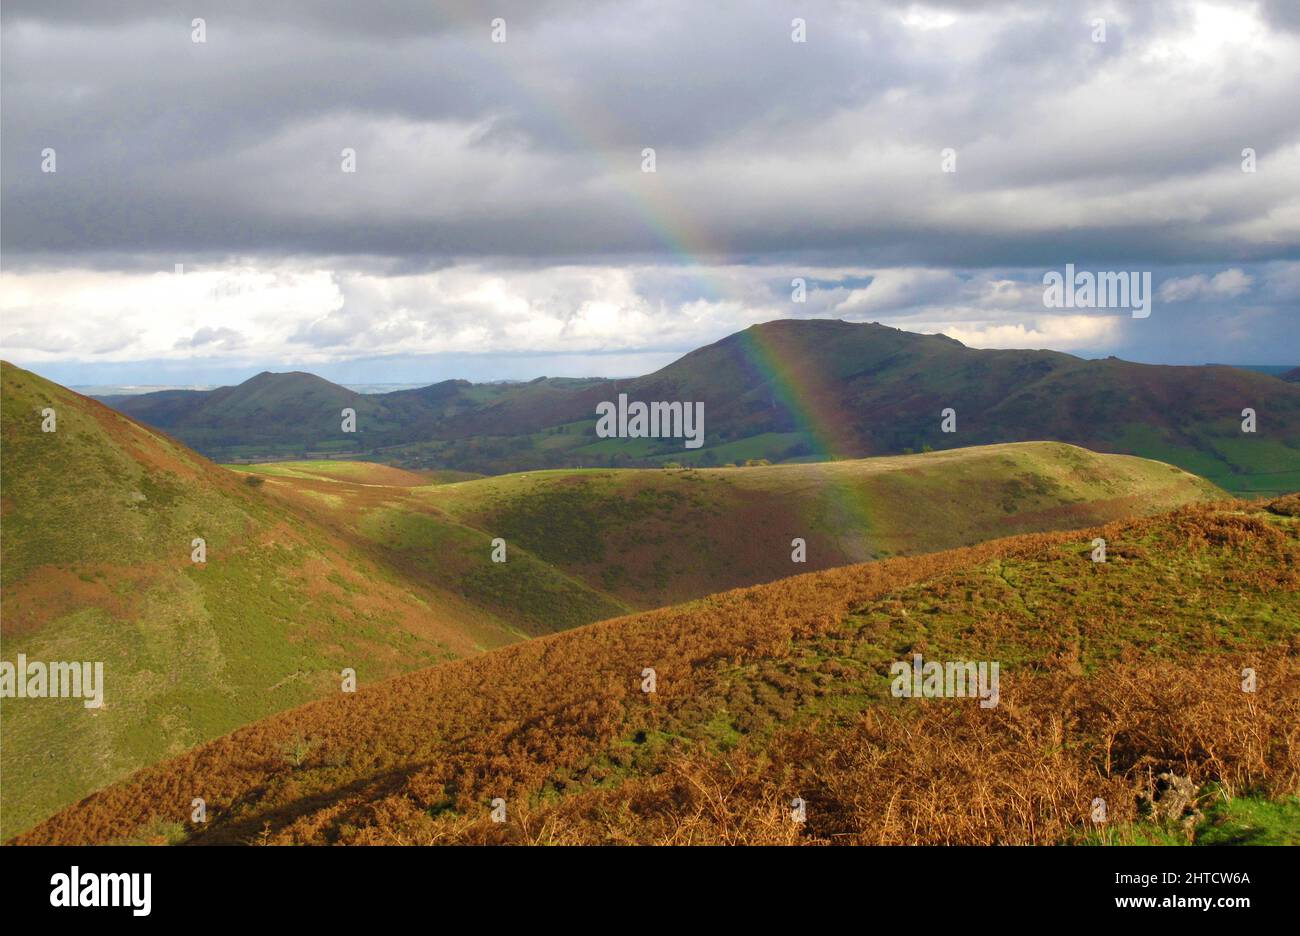 Long Mynd, Church Stretton, Shropshire, 2010. General view looking across the hills of the Long Mynd, with the end of a rainbow visible in the foreground. Stock Photo